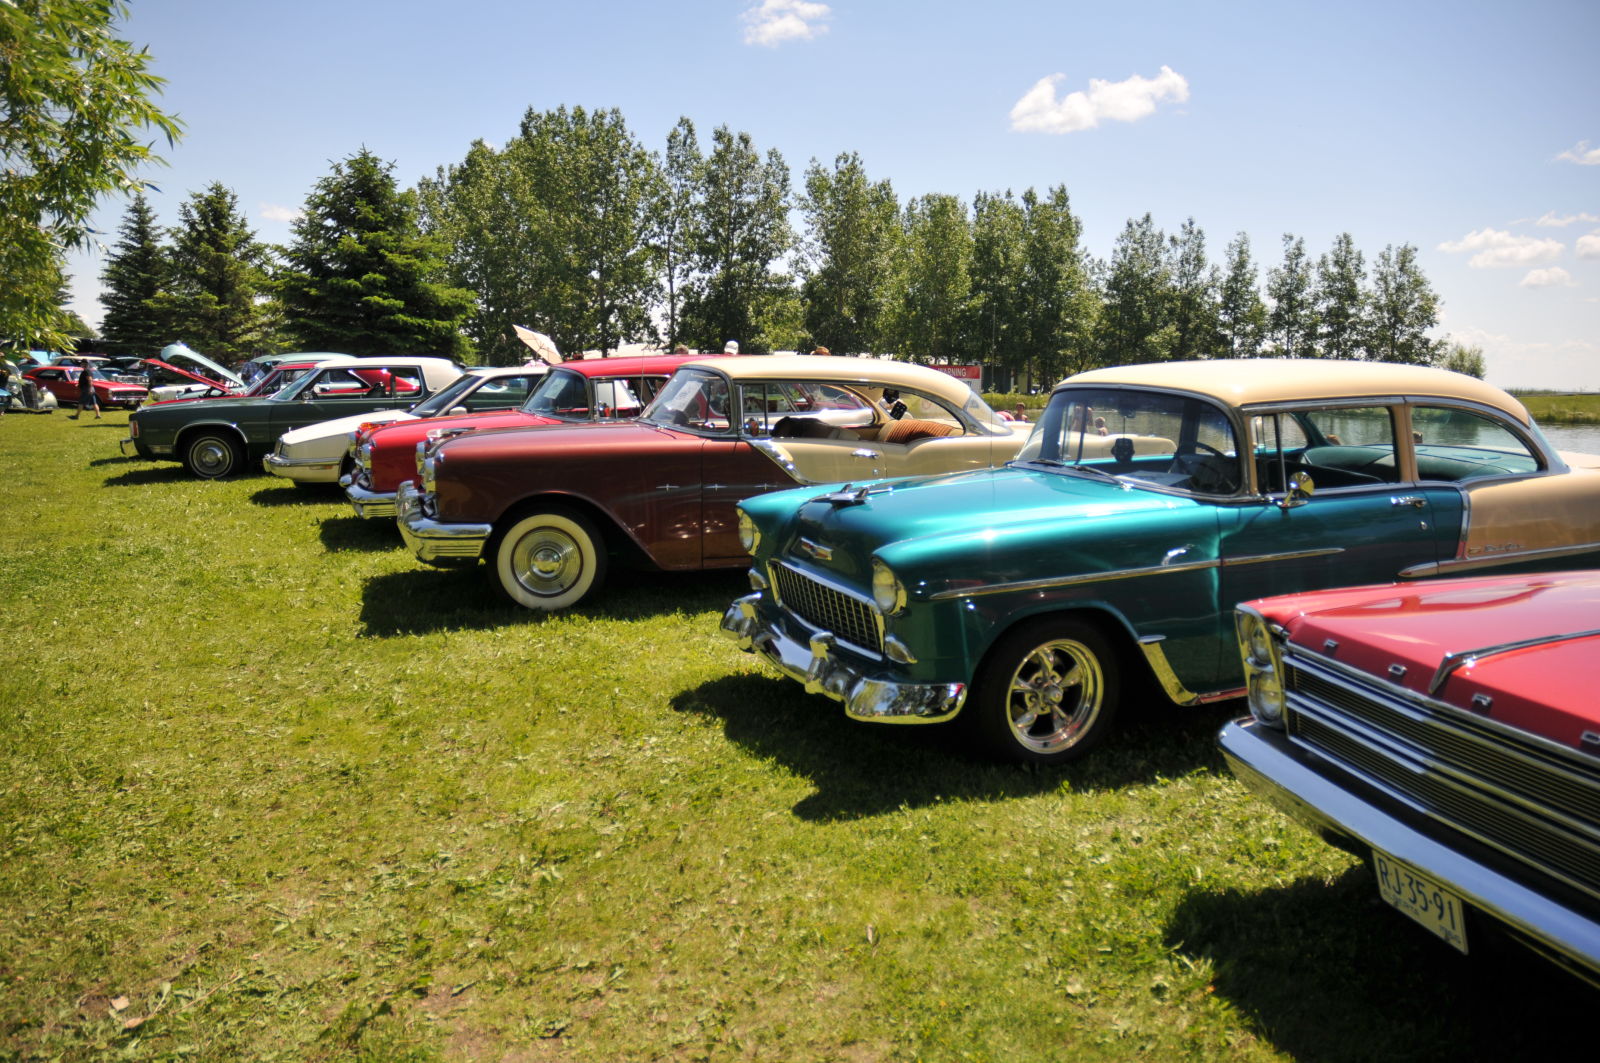 A typical summer car show. This scene might not happen again for a while.